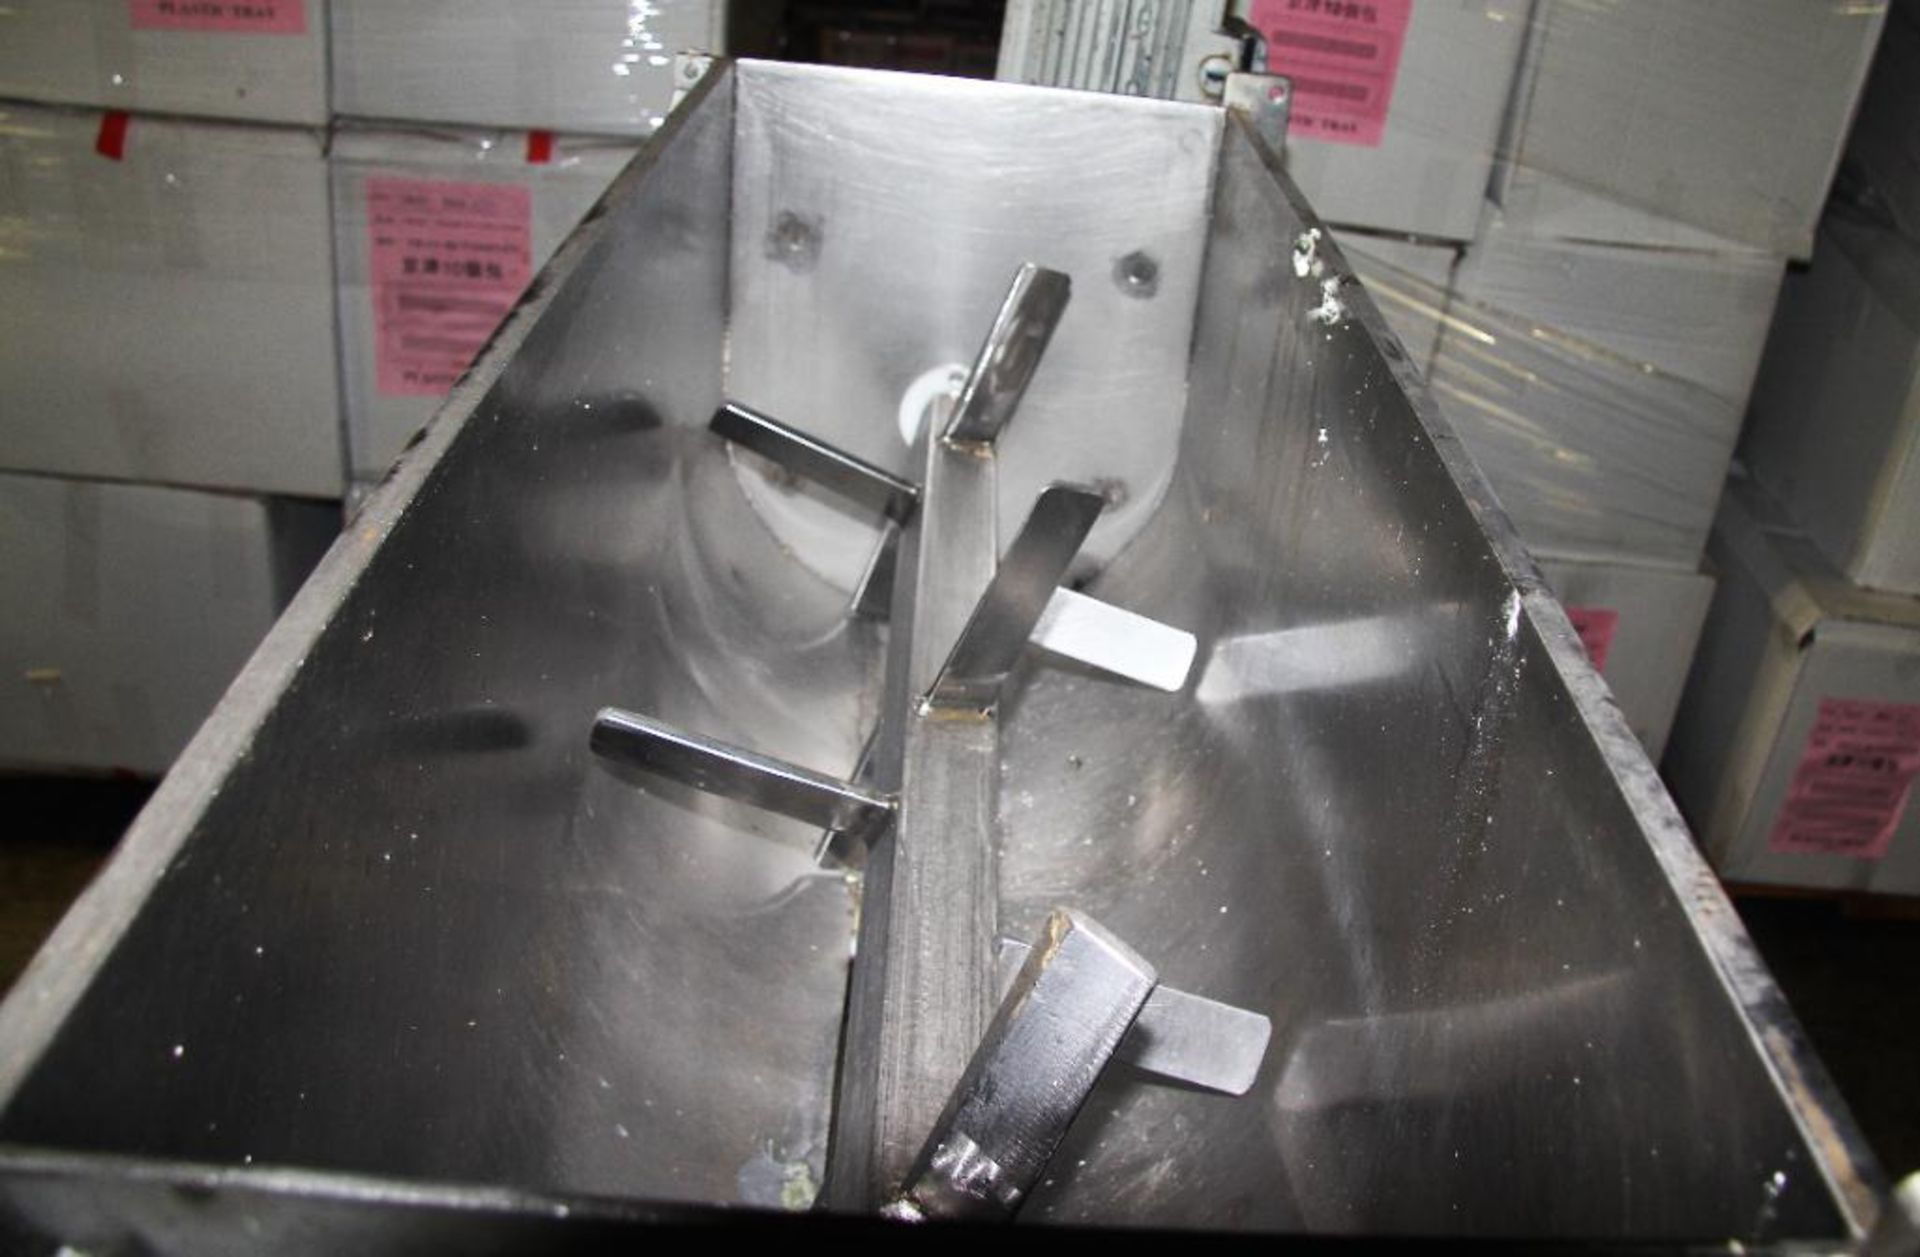 Automatic Pasta Sheeter With Mixer, Top Mounted 38-1/2" Long X 13-1/2" Wide X 16-1/2" Deep Stainless - Image 4 of 7